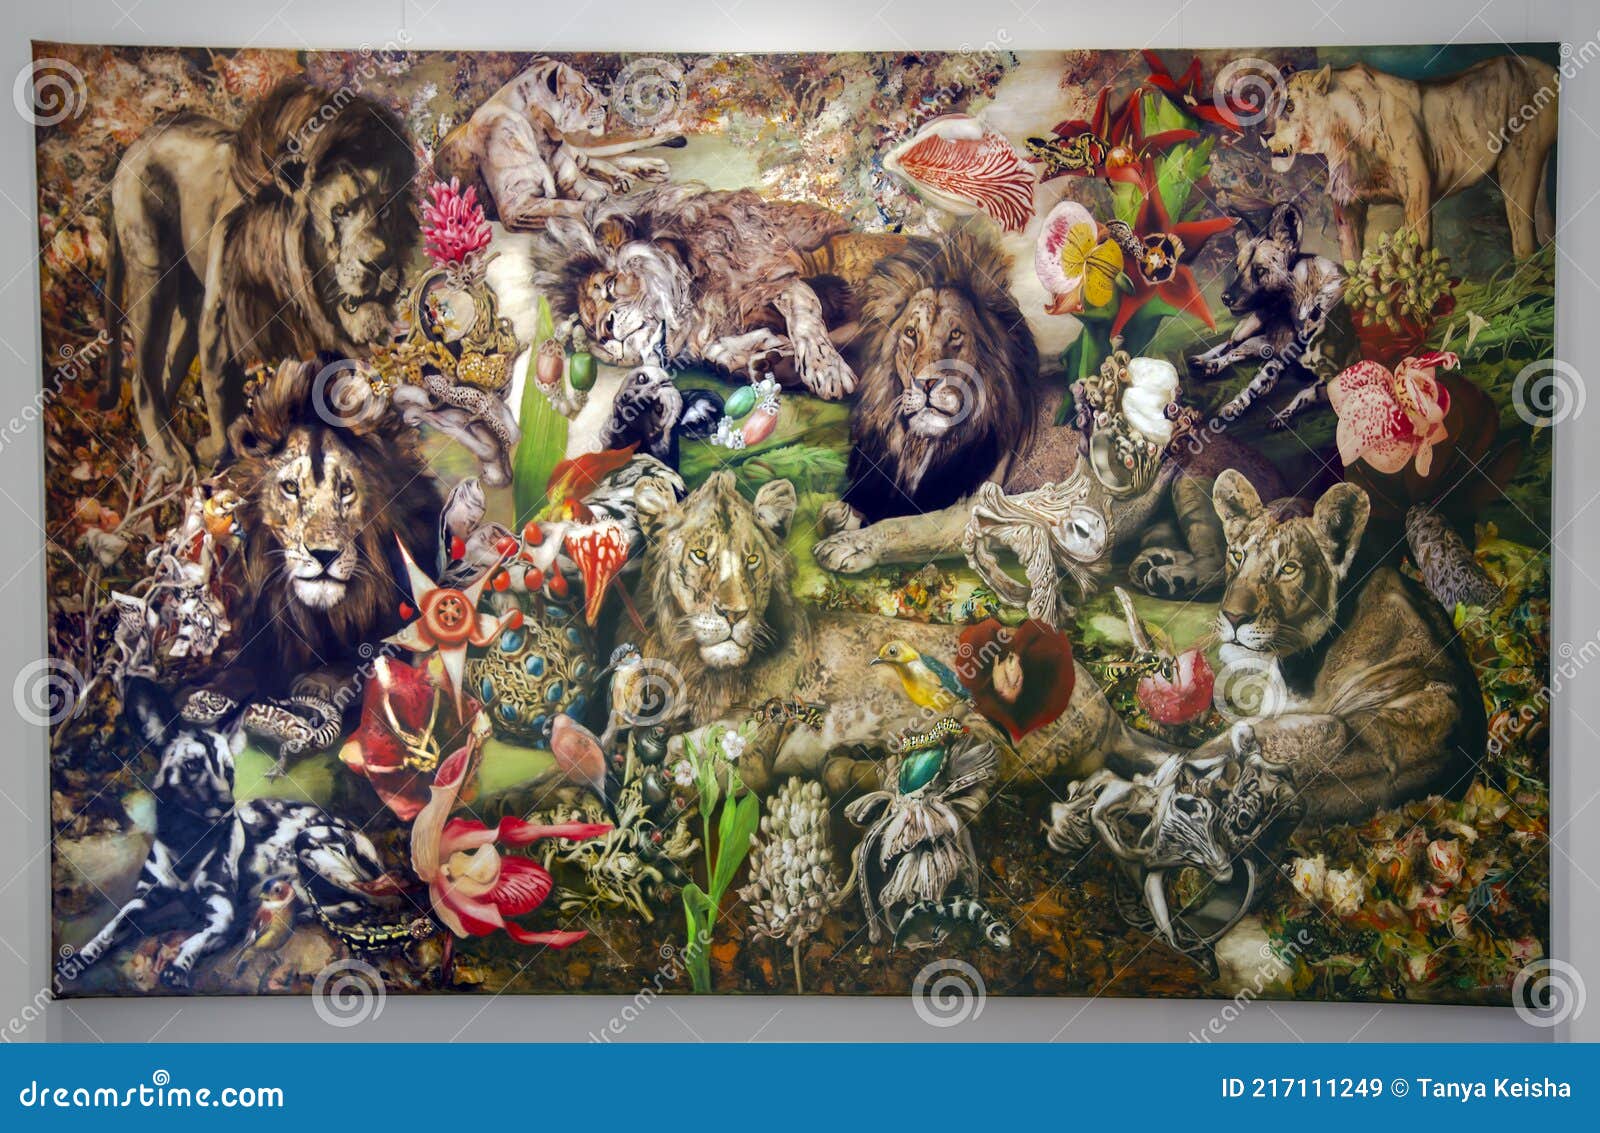 627 Animal Acrylic Painting Stock Photos - Free & Royalty-Free Stock Photos  from Dreamstime